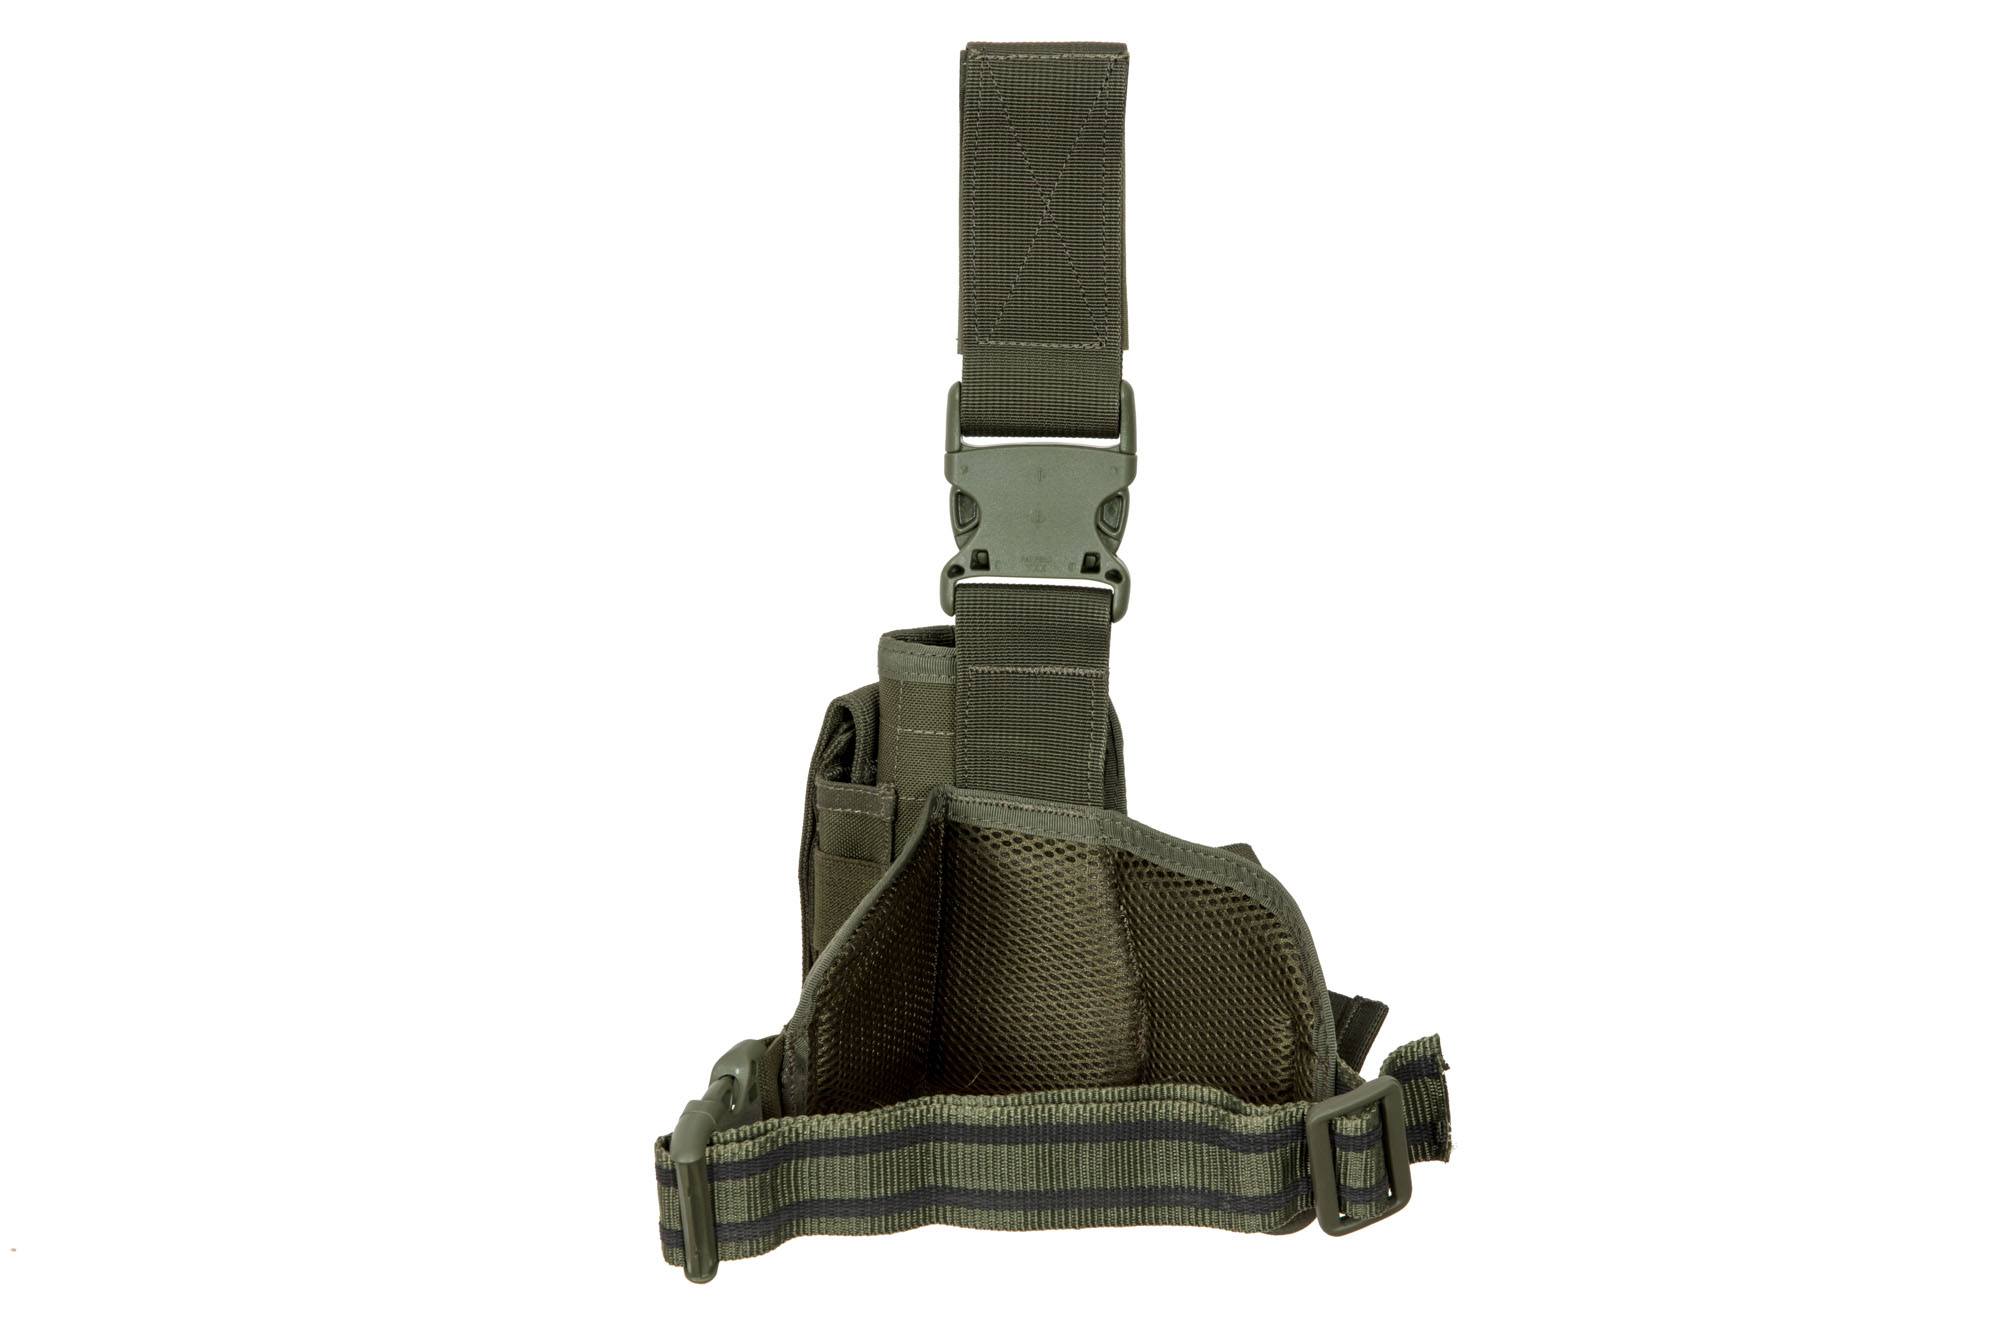 Holster universel pour jambes tombantes - Olive Drab